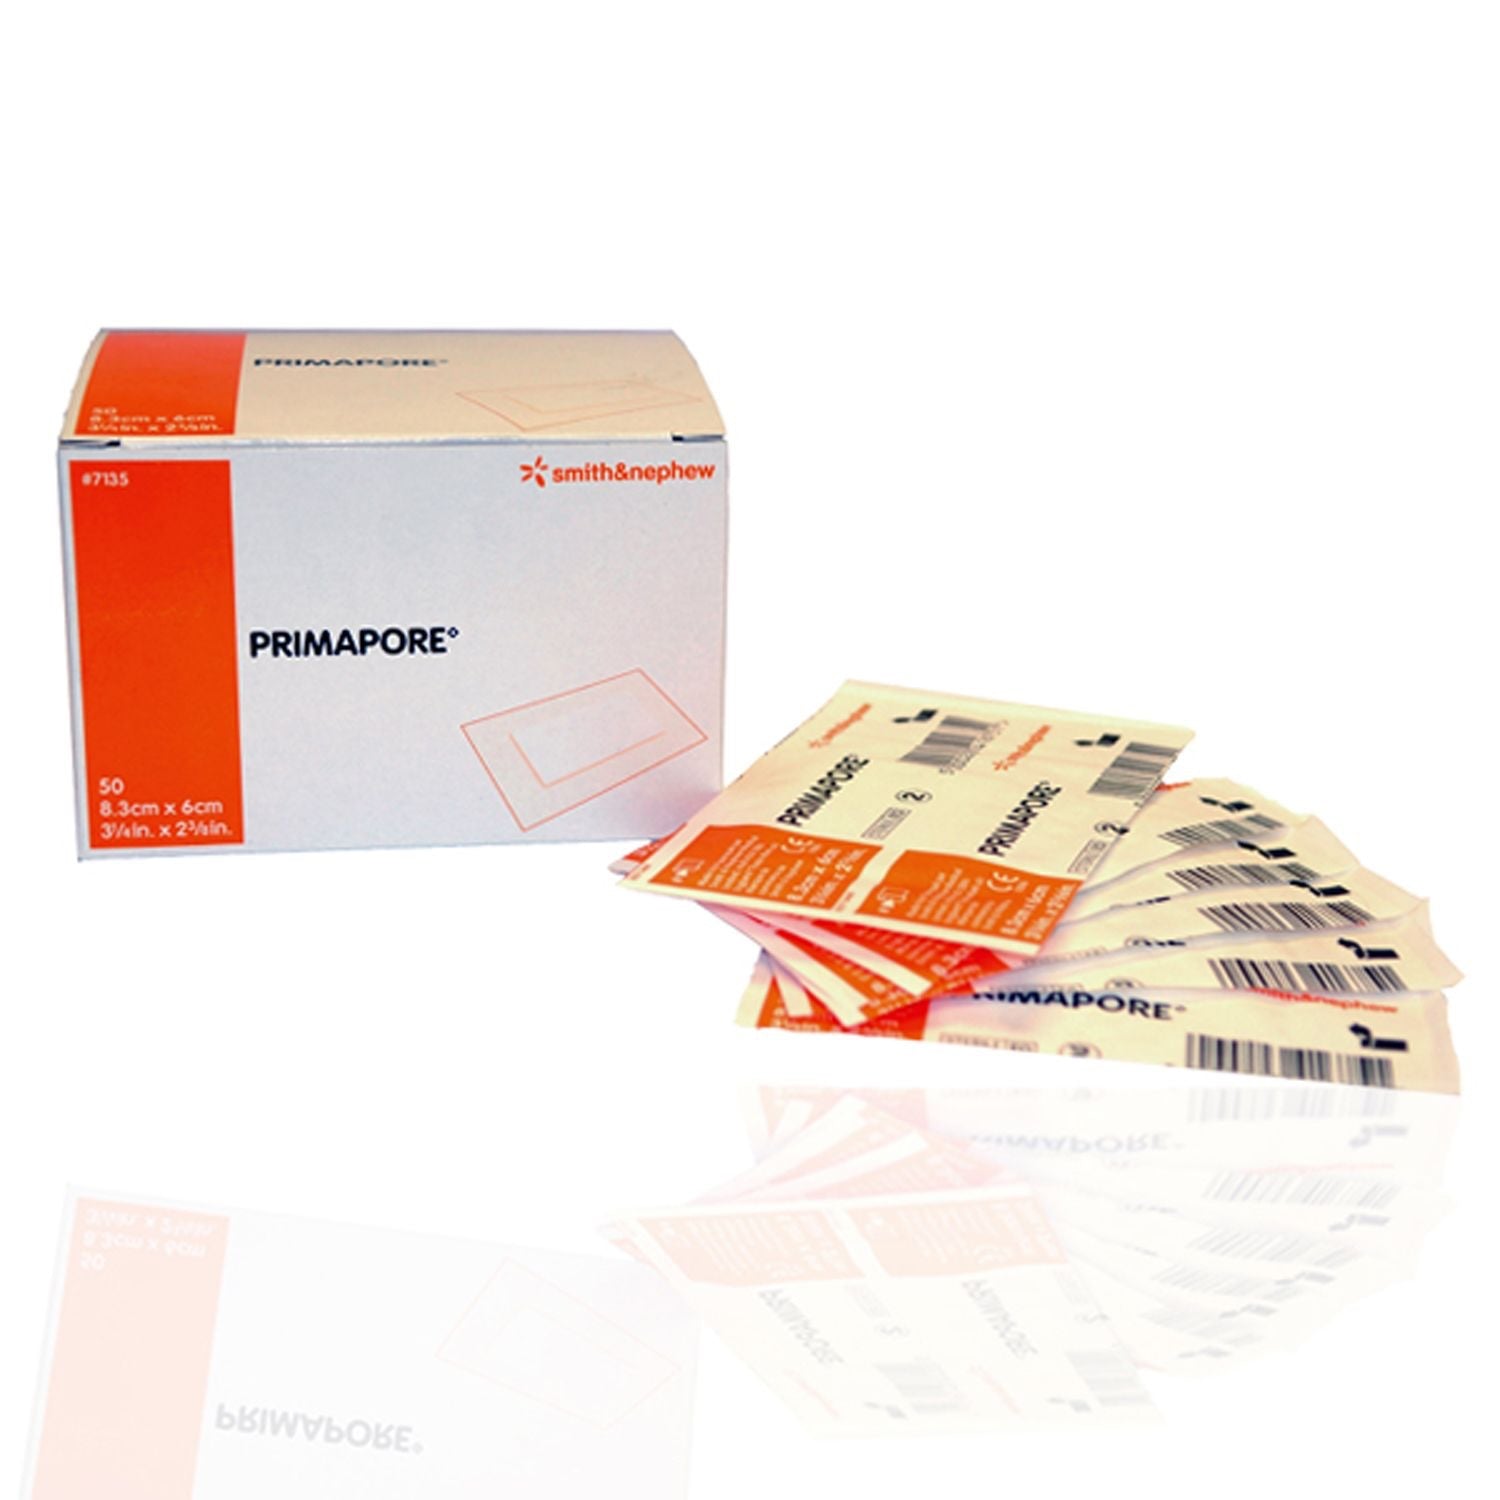 Primapore Adhesive Wound Dressing | Pack of 20